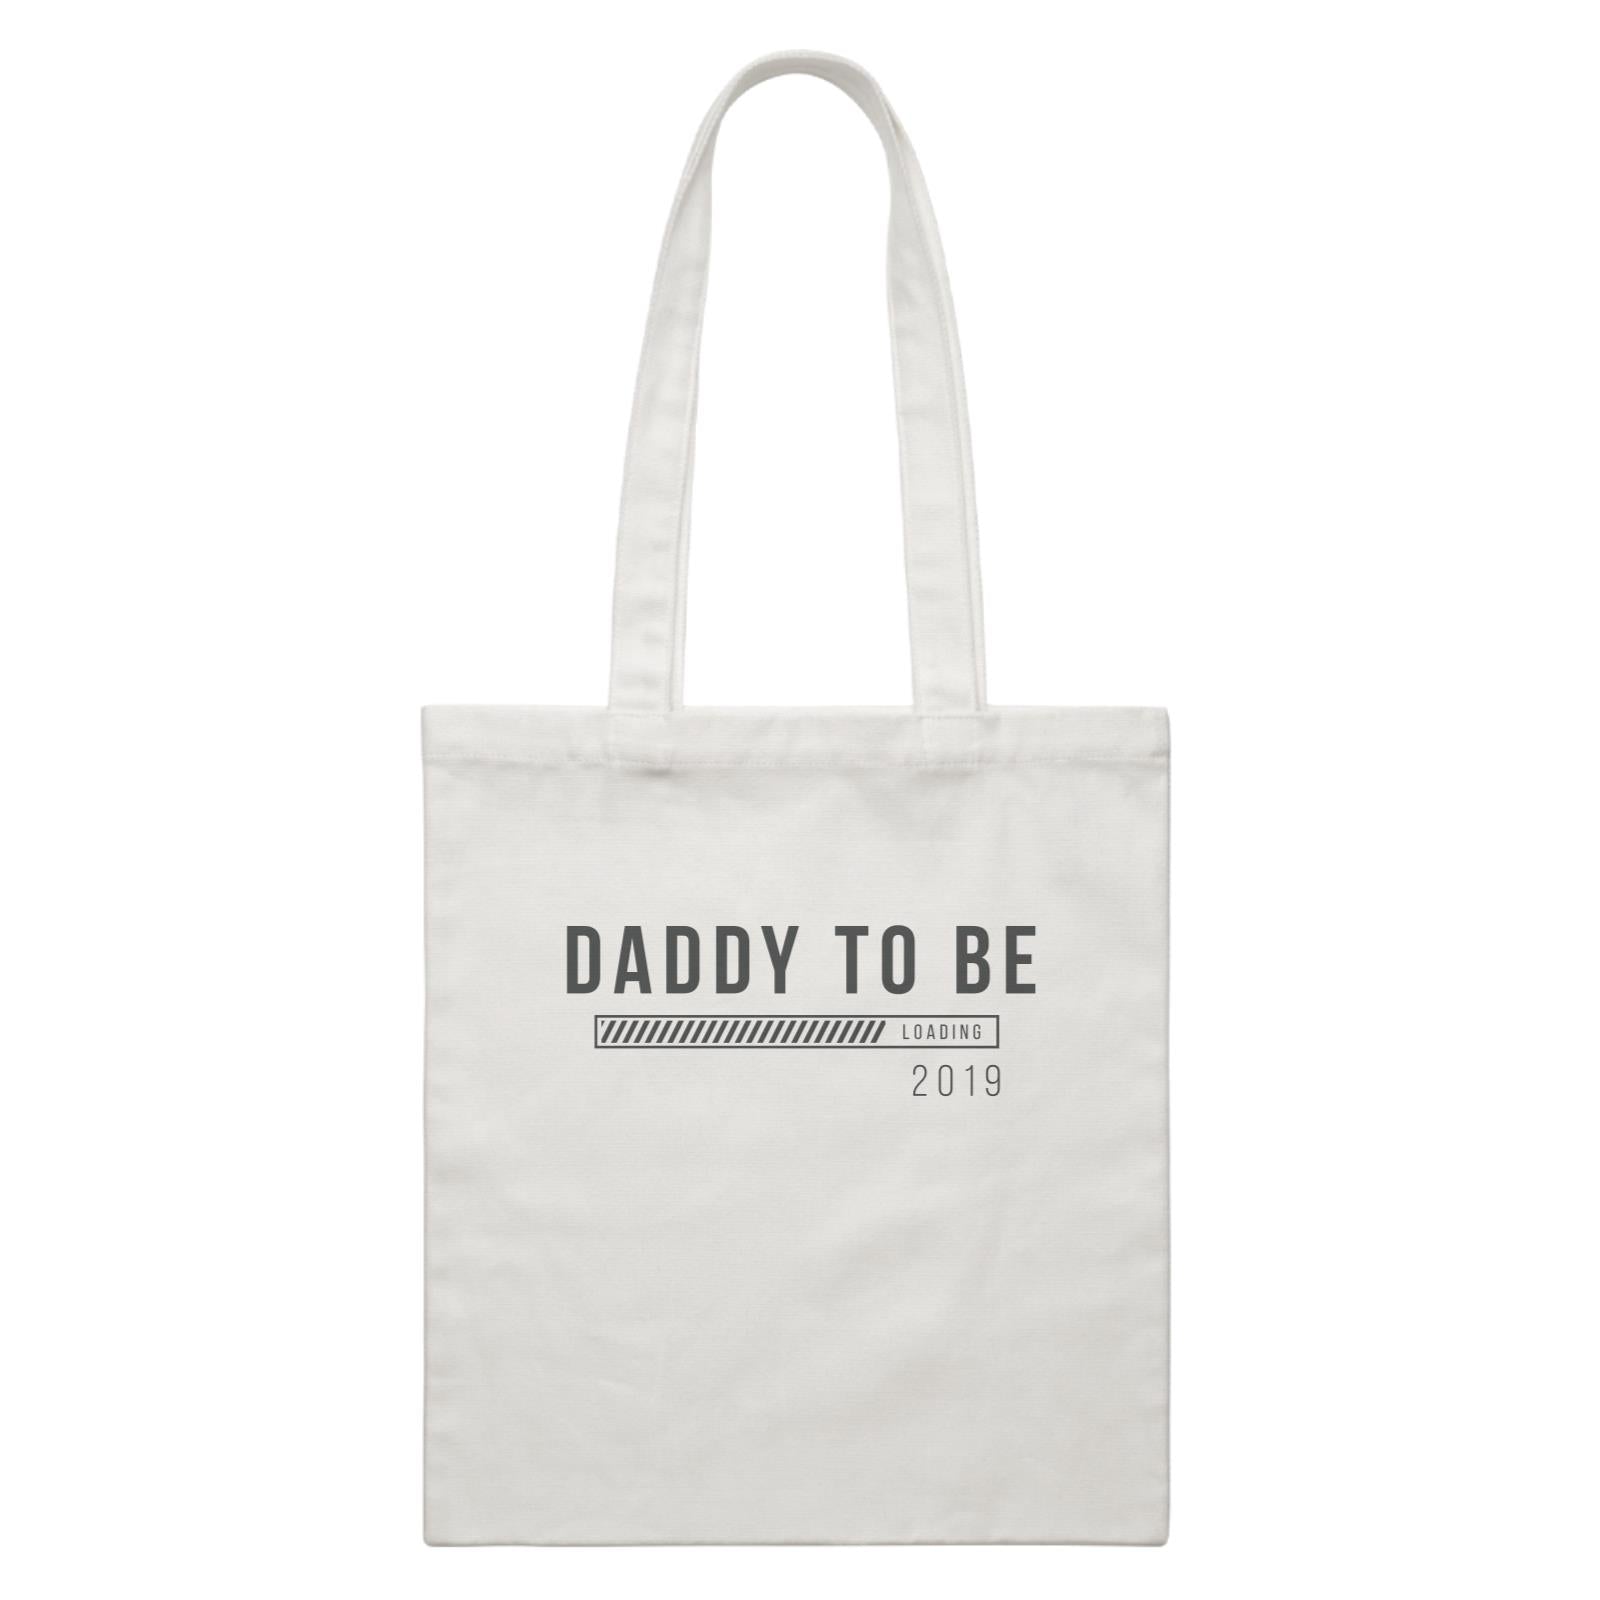 Coming Soon Family Daddy To Be Loading Add Date White Canvas Bag